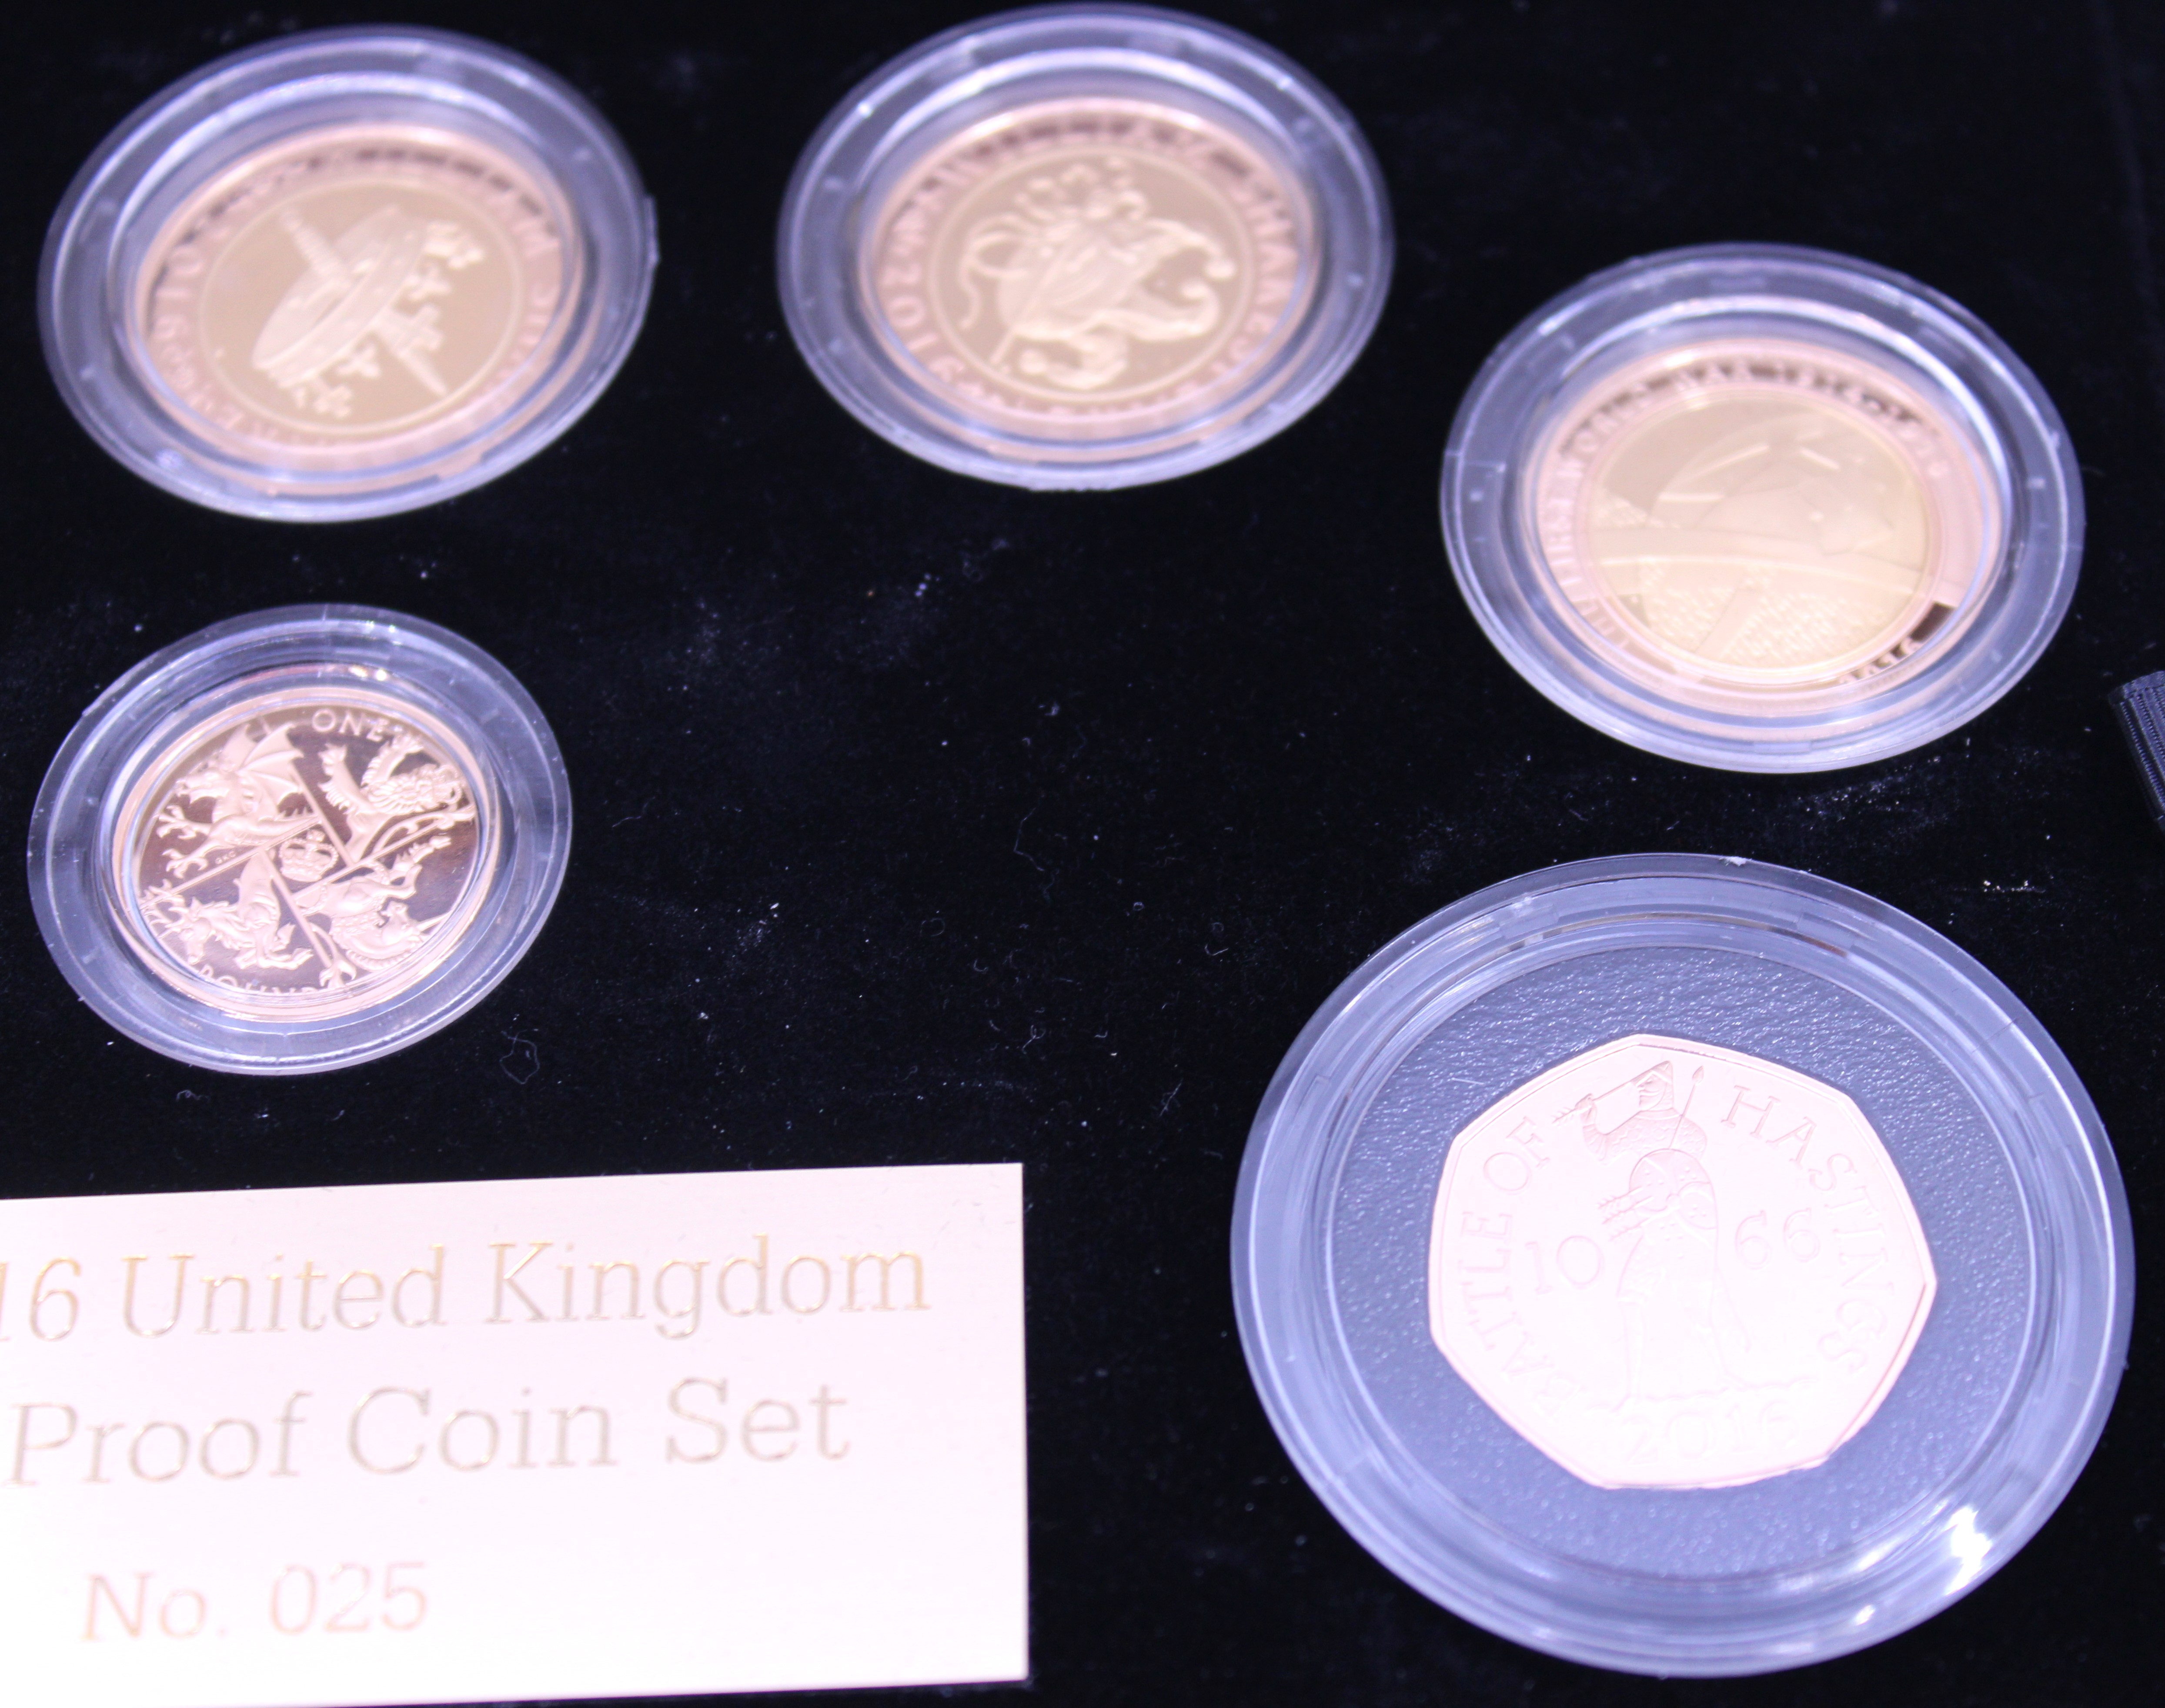 2016 UK Gold Proof Annual Set from The Royal Mint with eight commemorative coins in original box. - Image 4 of 5